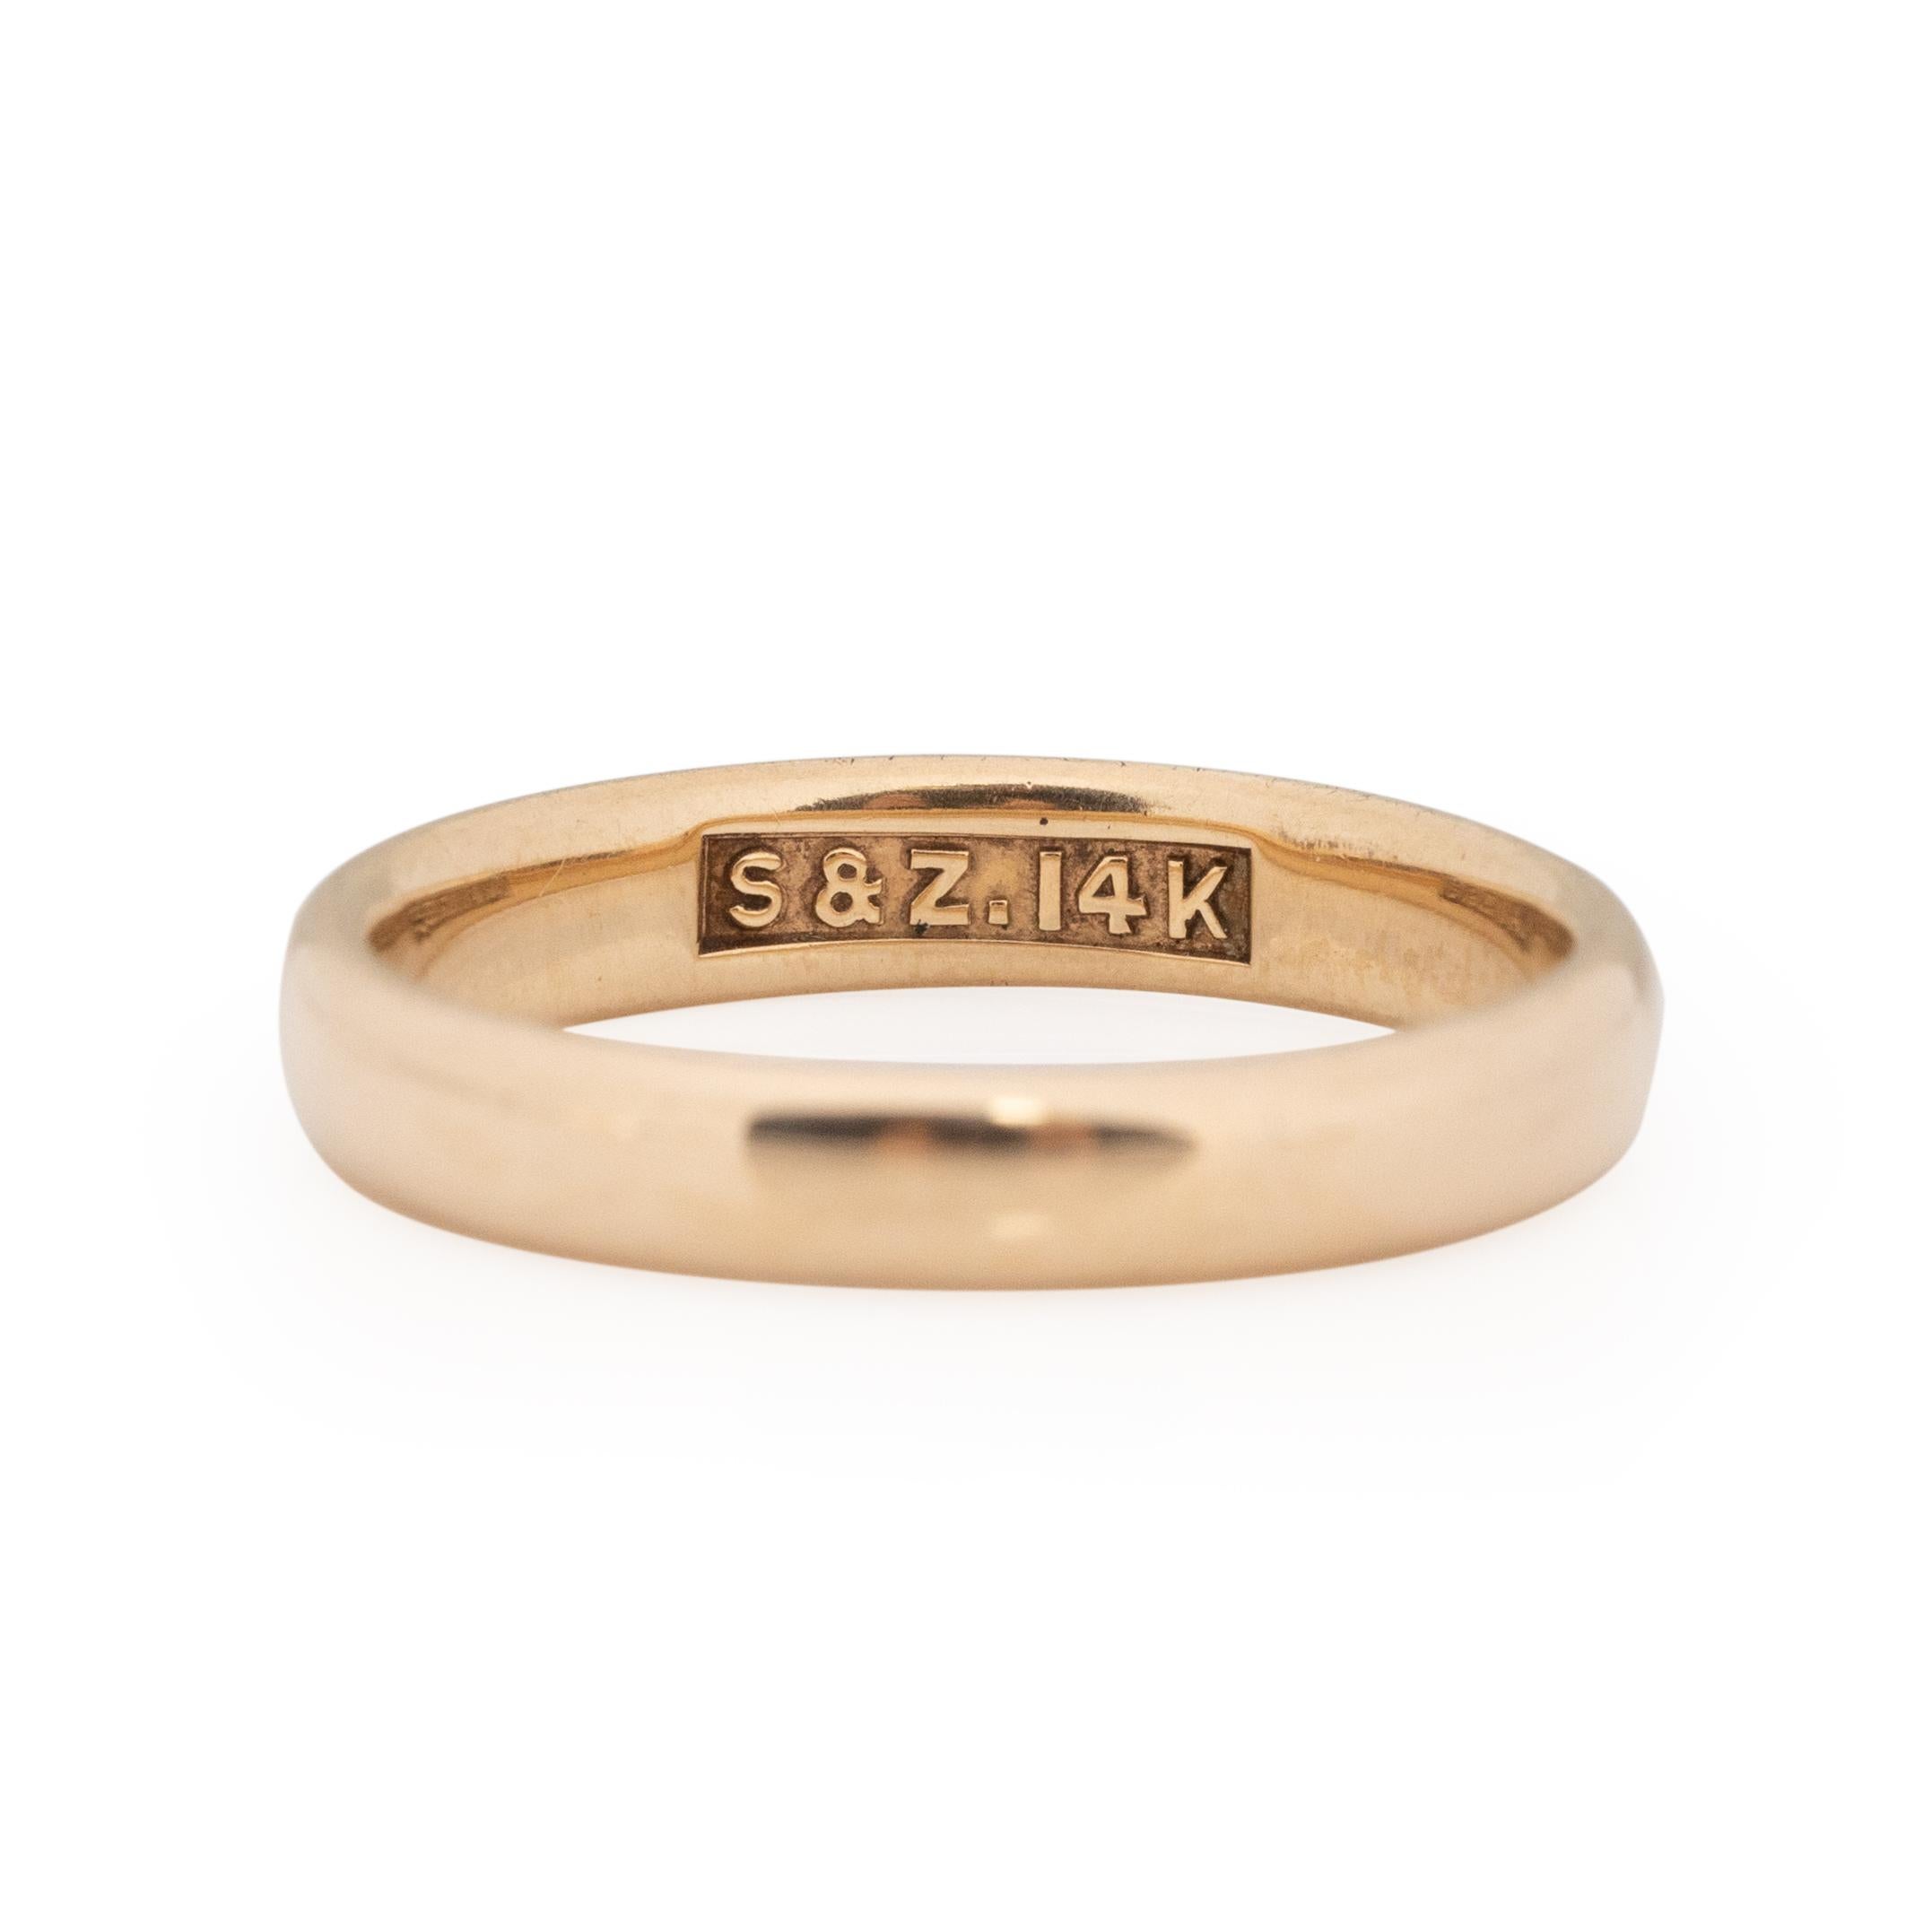 Looking for a classic? This 14K yellow gold band is just that, the sooth mirror like finish and the comfort fit is timeless and perfect in every way. This band would look wonderful on any man or woman, stacked with other vintage bands, paired with a